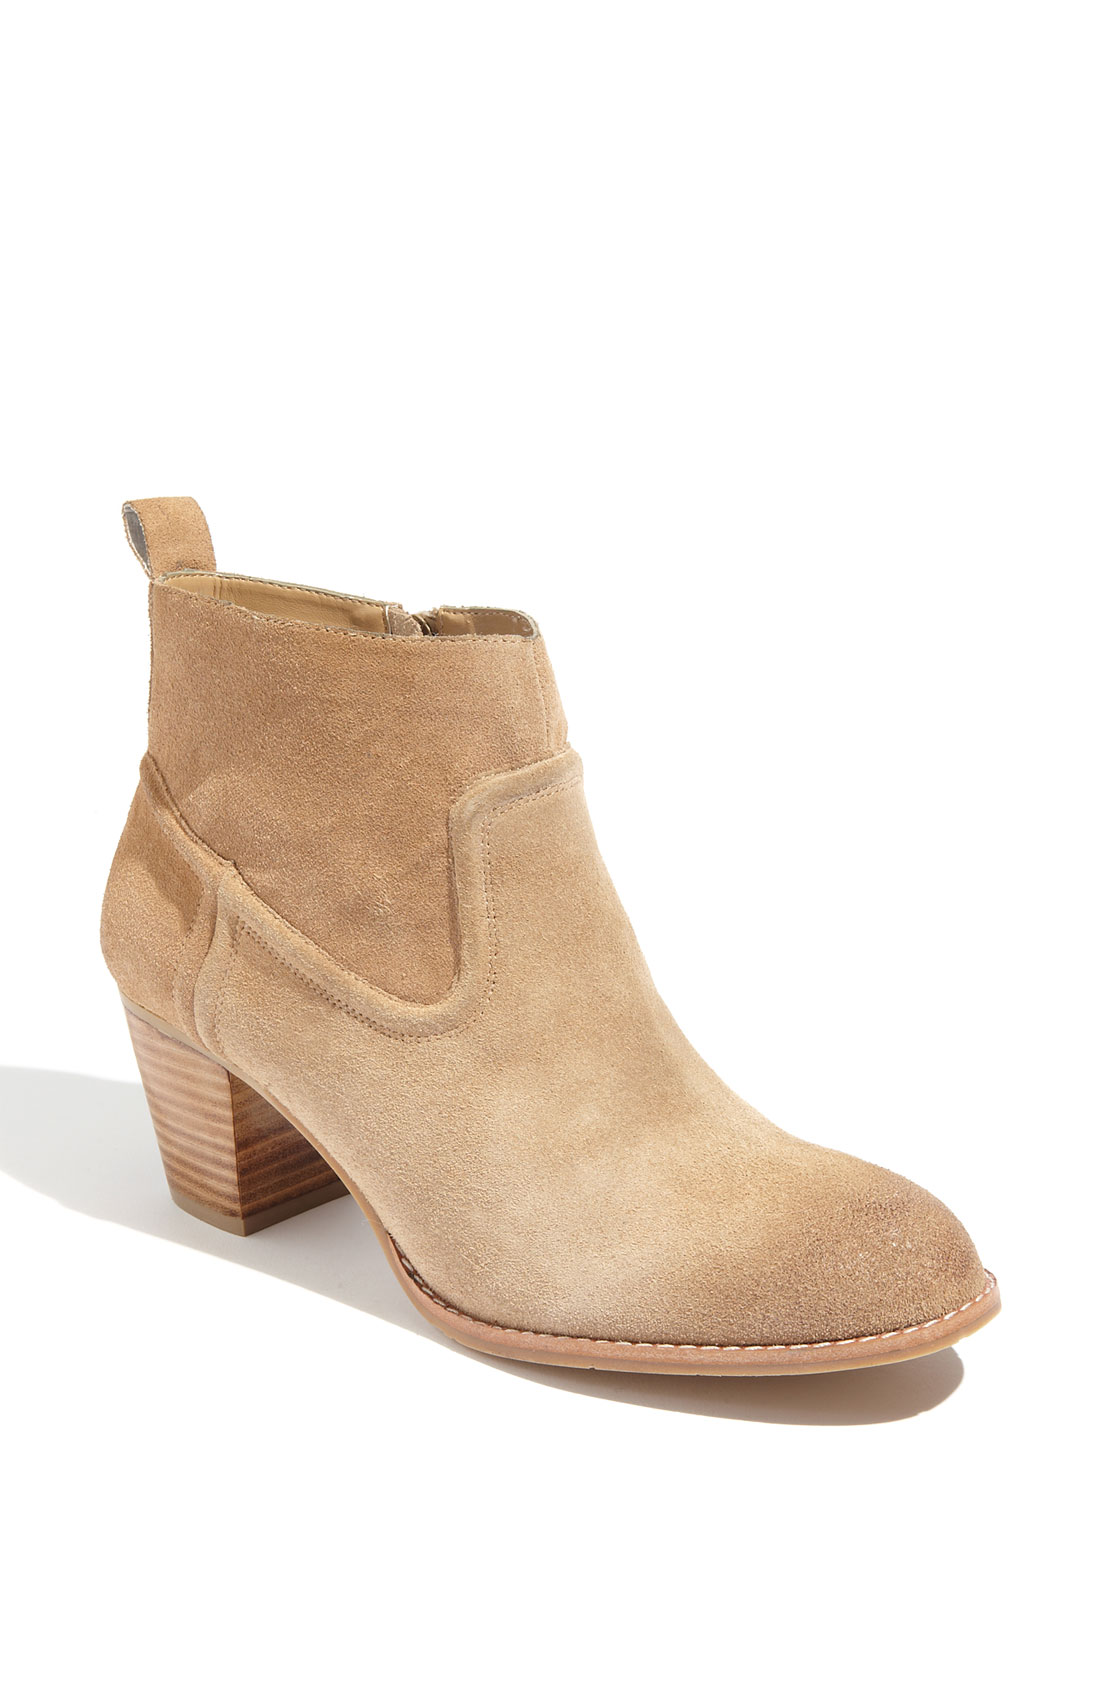 Dv By Dolce Vita Jamison Boot in Beige (natural suede) | Lyst